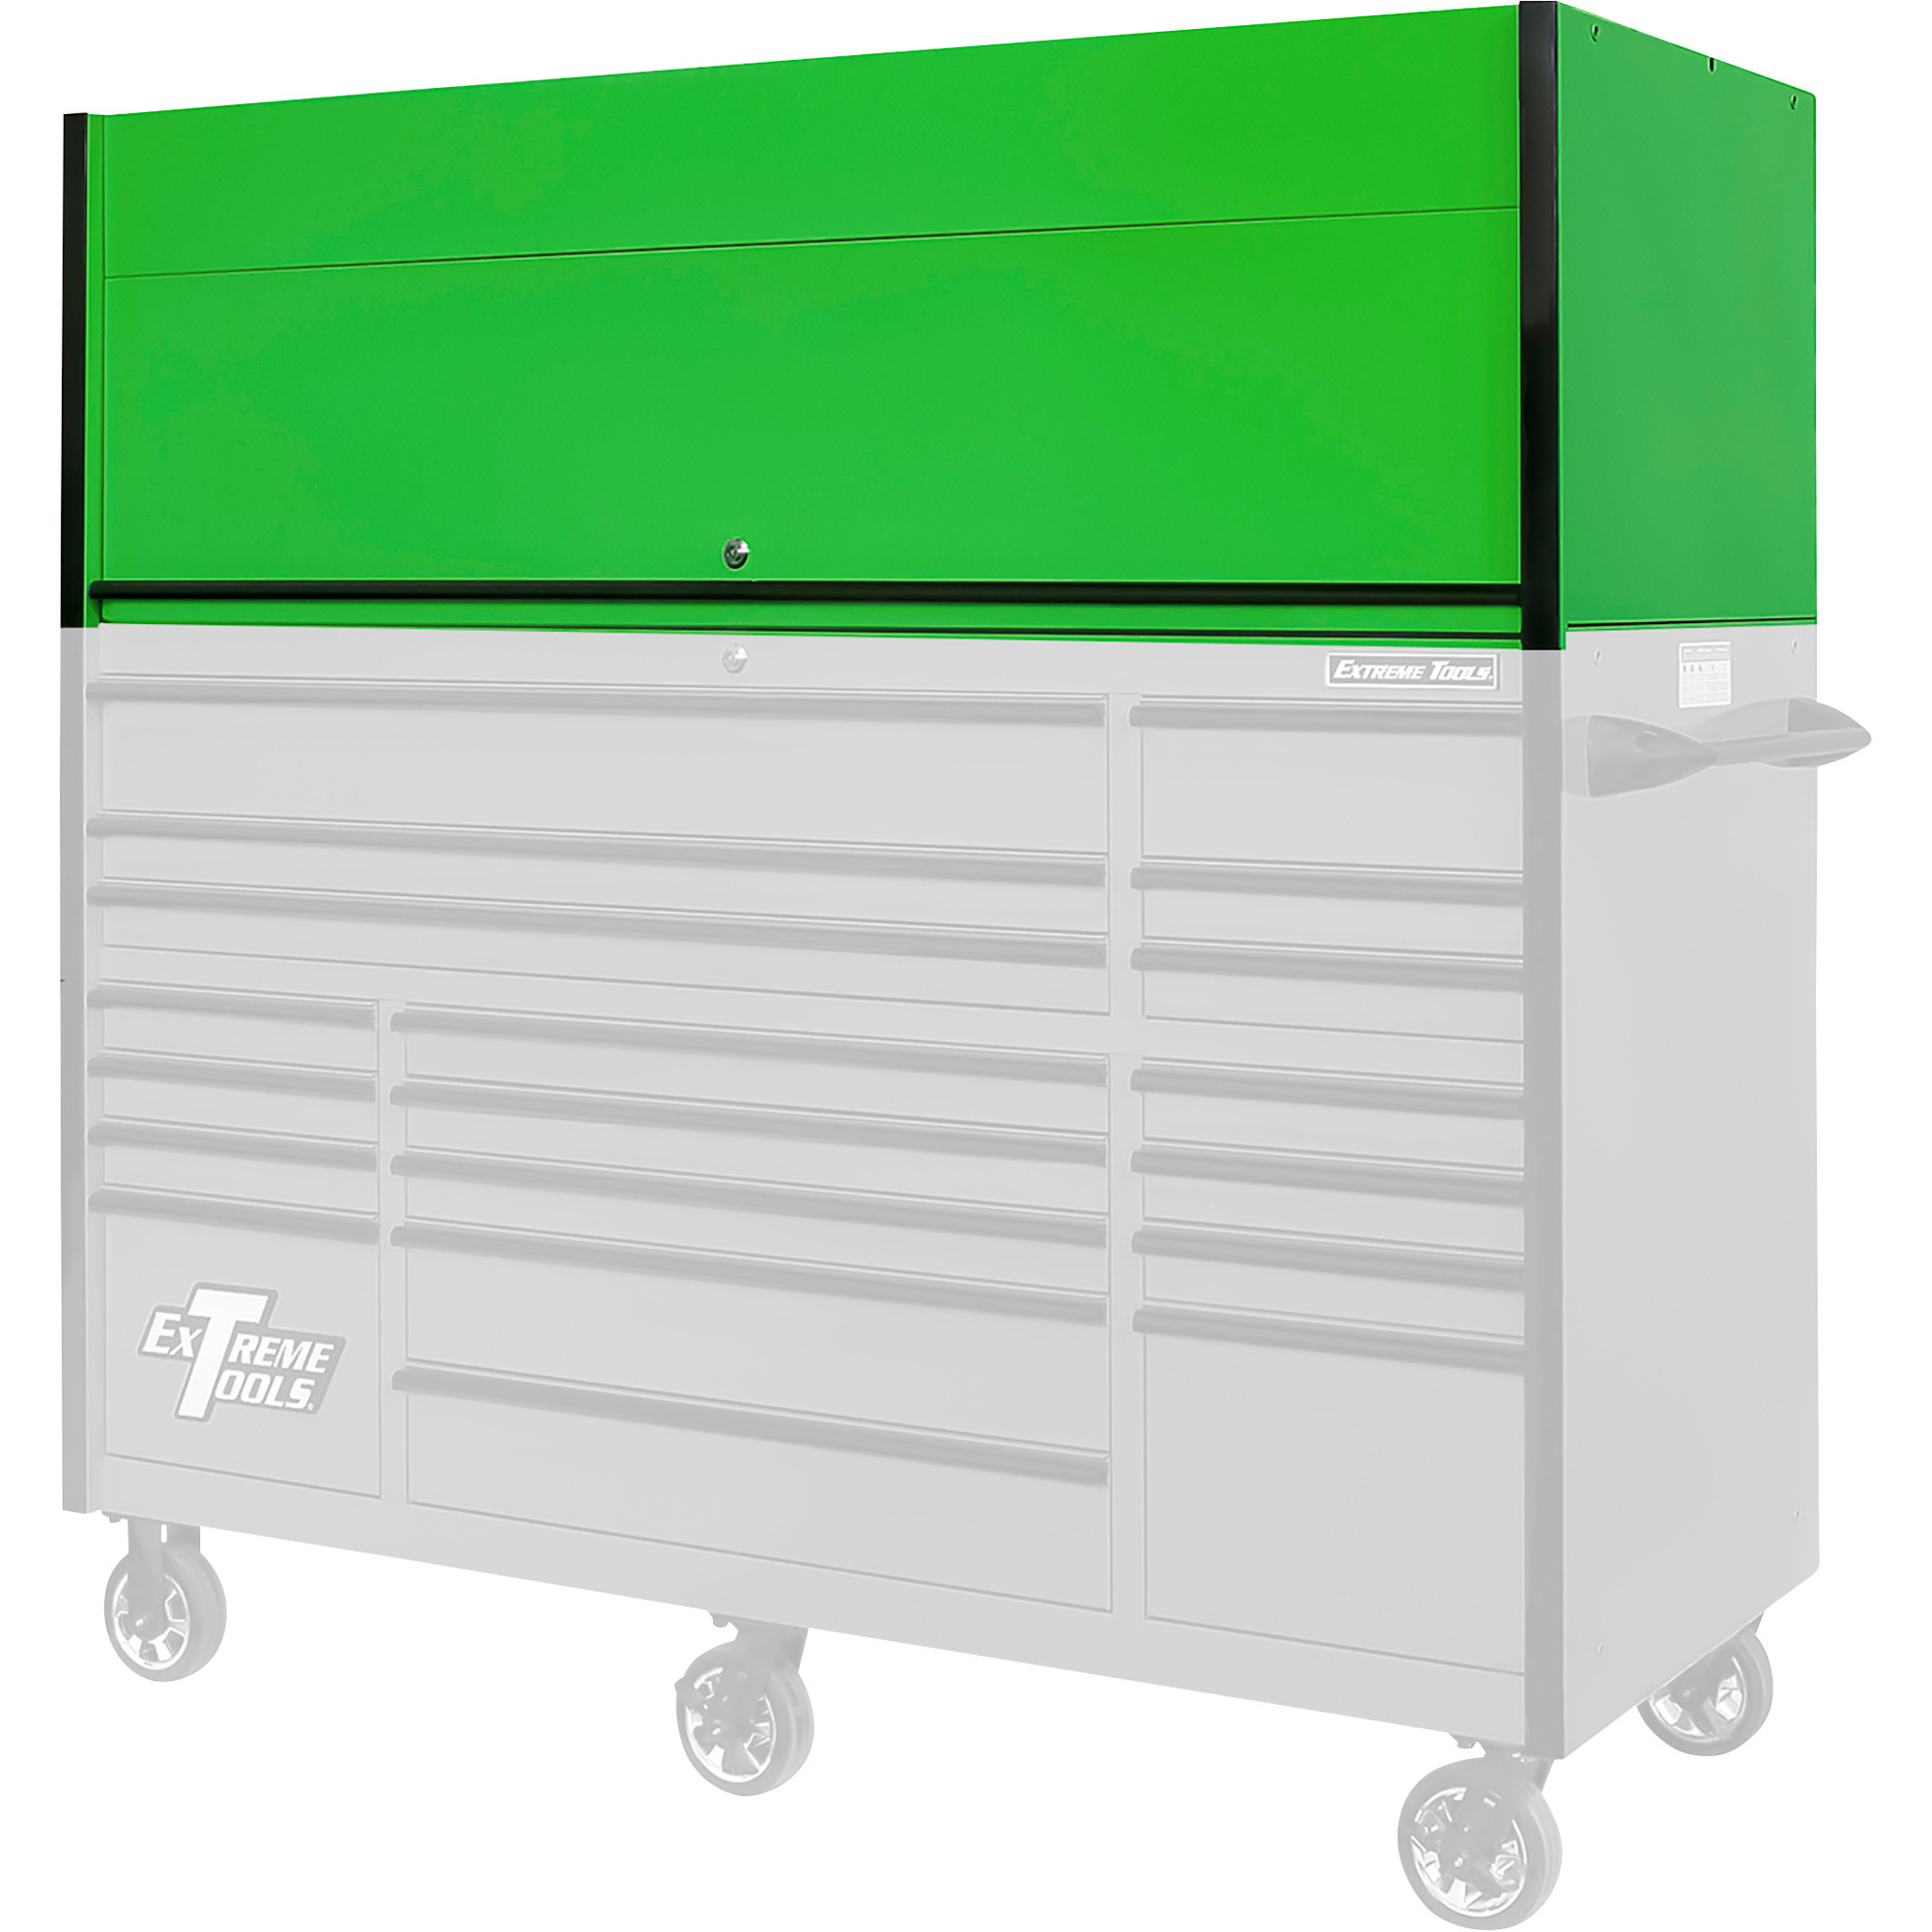 Extreme Tools RX Series 72Inch Extreme Power Workstation Professional Hutch — Green with Black Handle, 72Inch W x 30Inch D x 22.3Inch H, Model -  RX723001HCGNBK